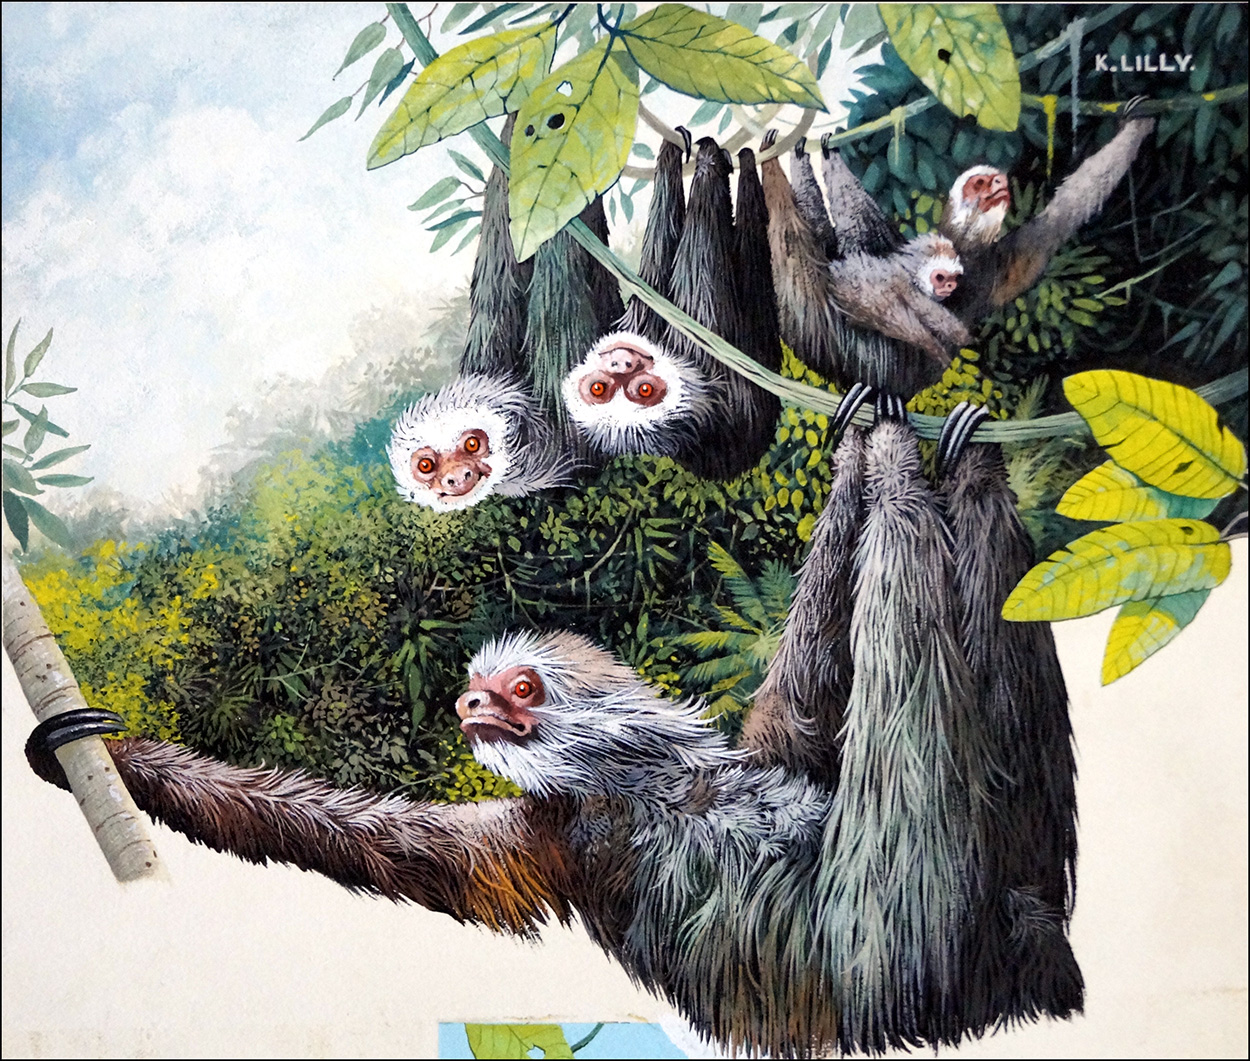 Hanging Around - The Sloth (Original) (Signed) art by Kenneth Lilly at The Illustration Art Gallery